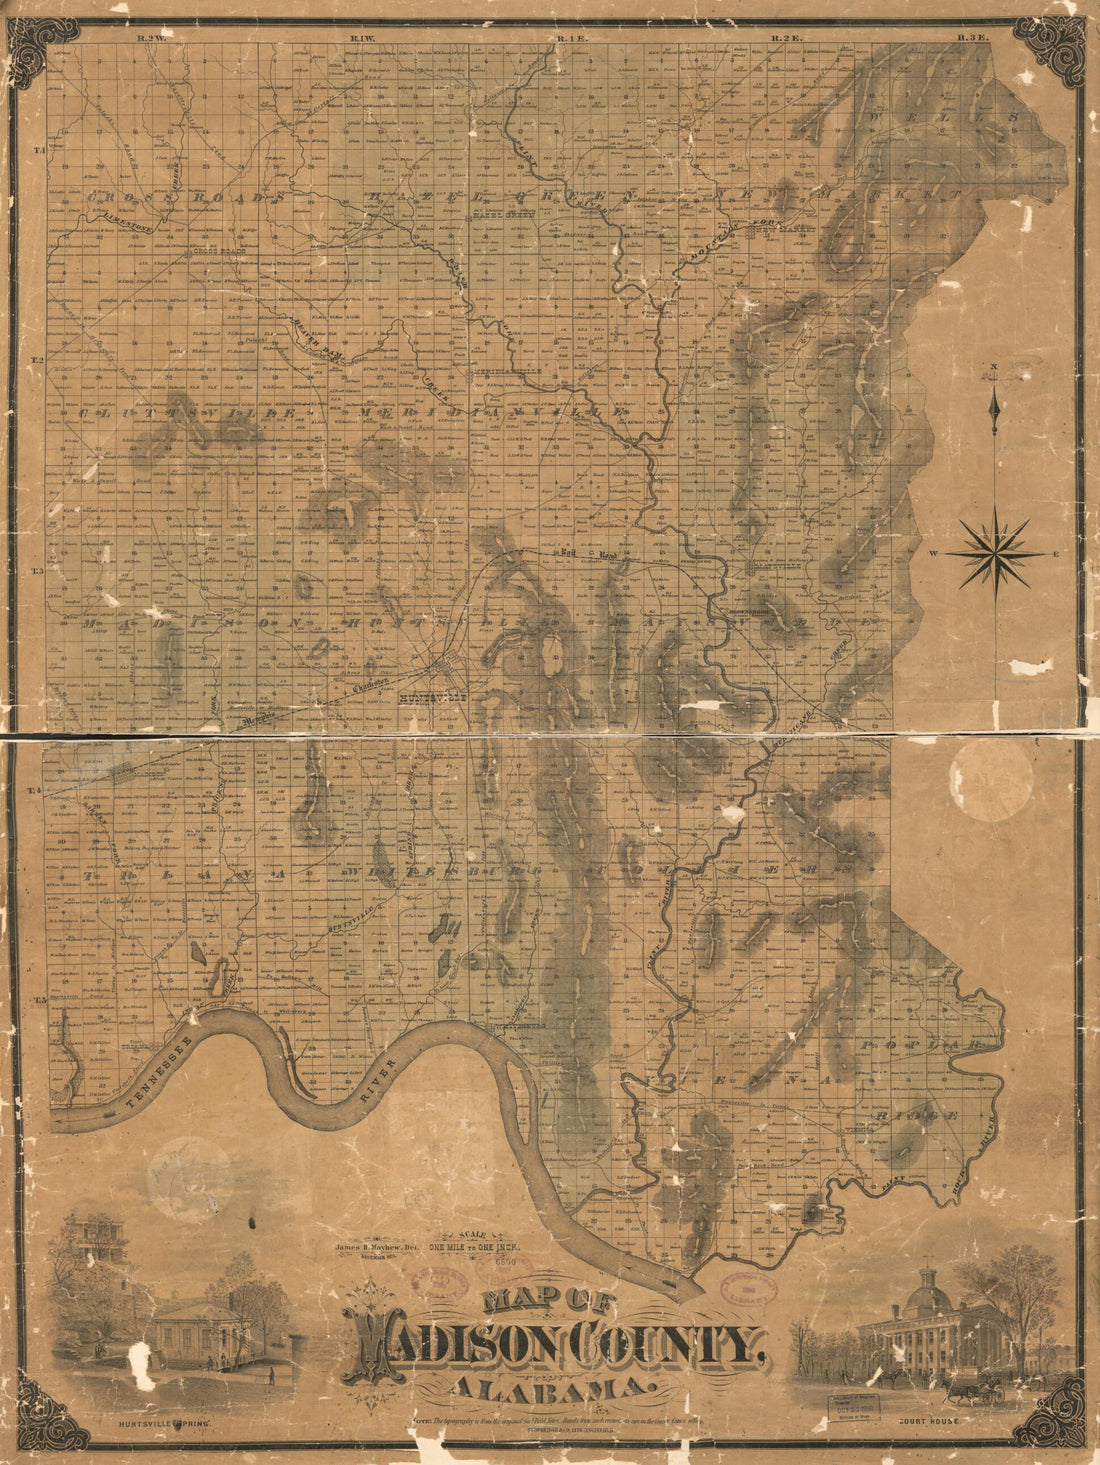 This old map of Map of Madison County, Alabama from 1875 was created by James H. Mayhew,  Strobridge &amp; Co. Lith in 1875